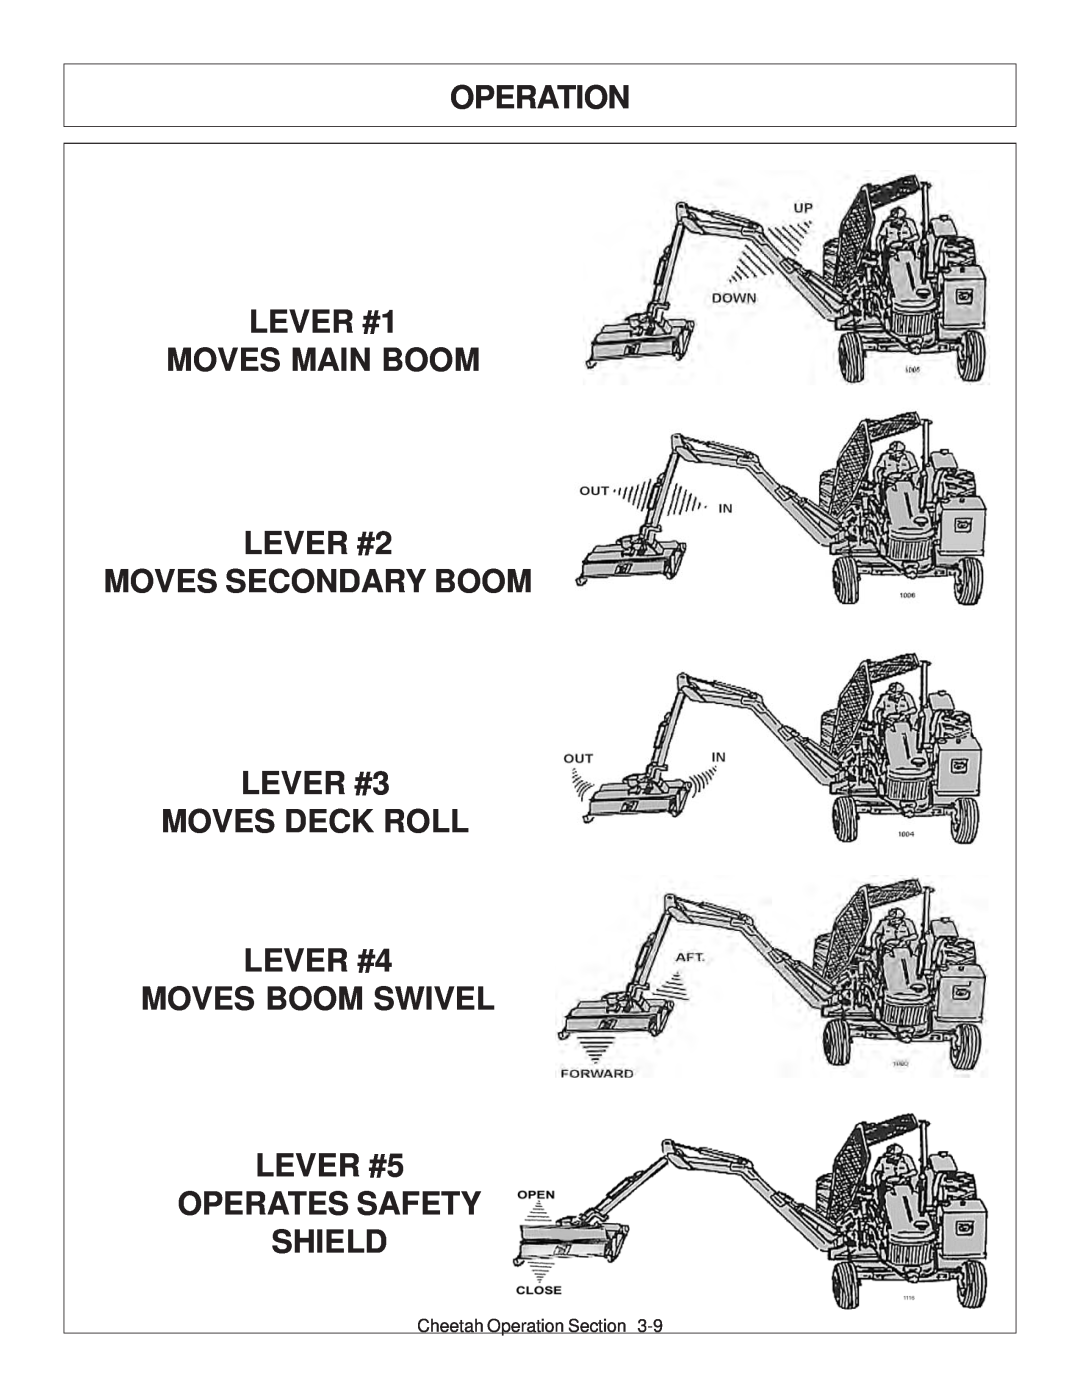 Tiger Products Co., Ltd JD 5101E OPERATION LEVER #1 MOVES MAIN BOOM LEVER #2 MOVES SECONDARY BOOM, Operates Safety Shield 